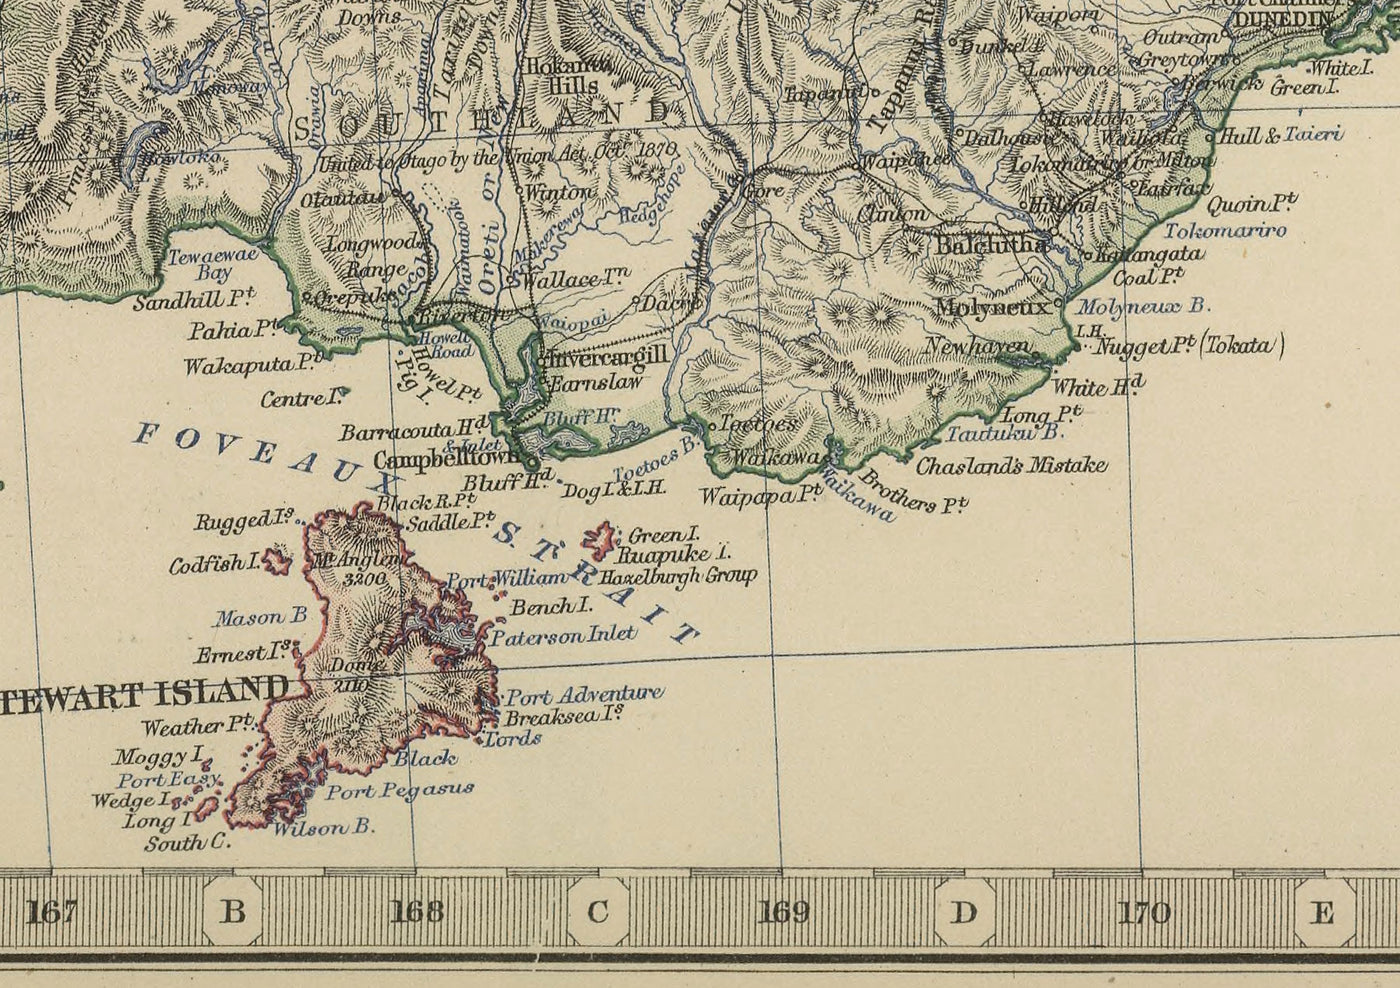 Old Map of New Zealand in 1879 by AK Johnston - Auckland, Christchurch, Wellington, Queenstown, Dunedin